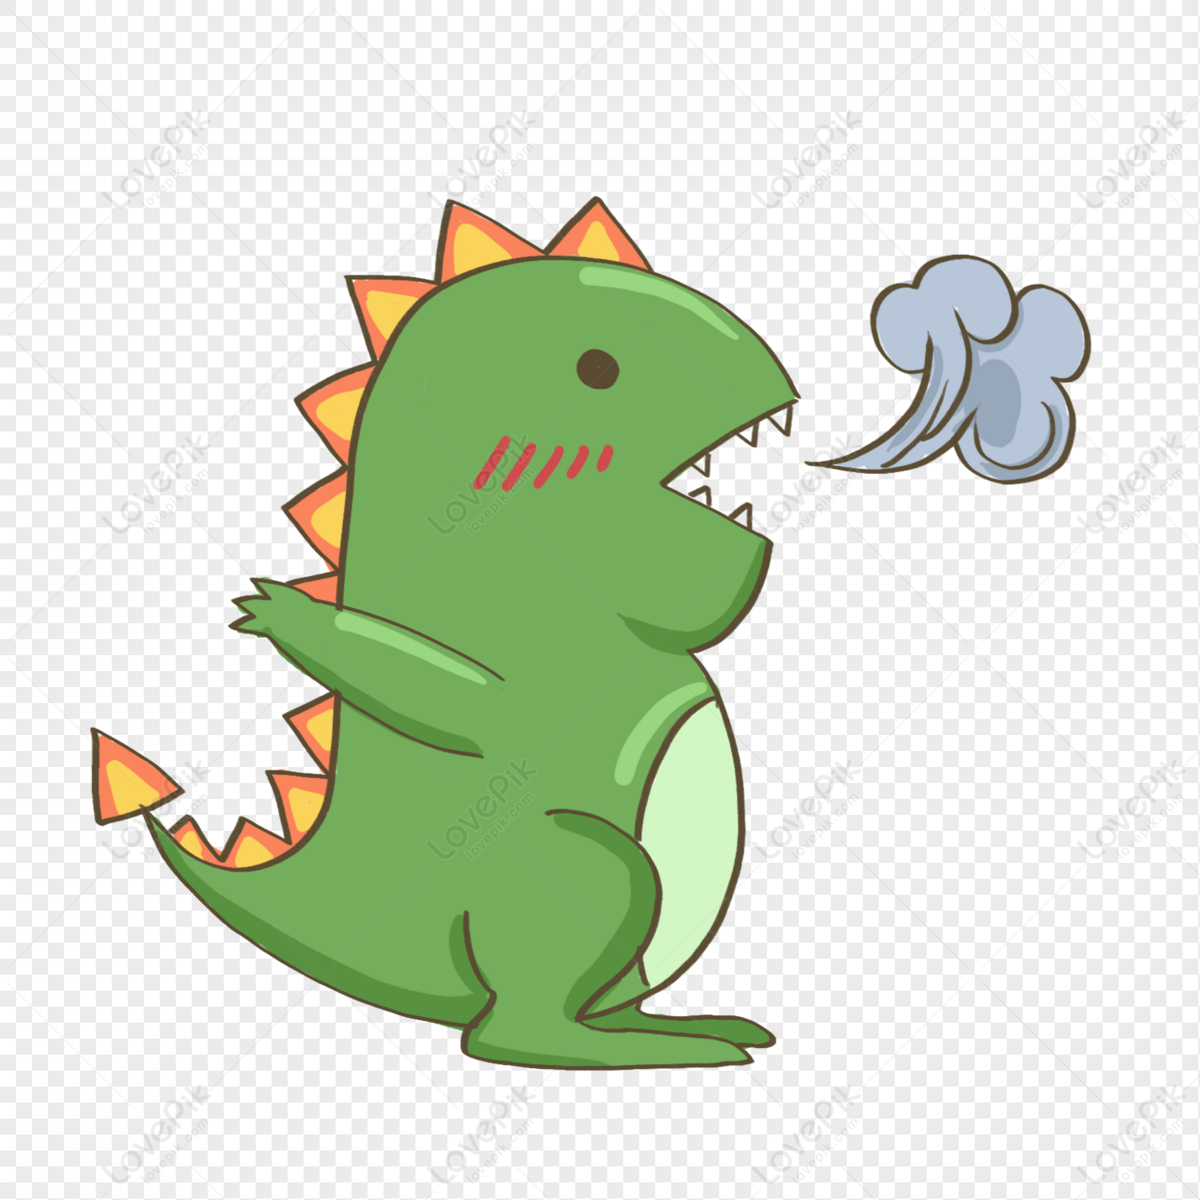 Green Cartoon Fire Breathing Dinosaur Free PNG And Clipart Image For Free  Download - Lovepik | 401555629